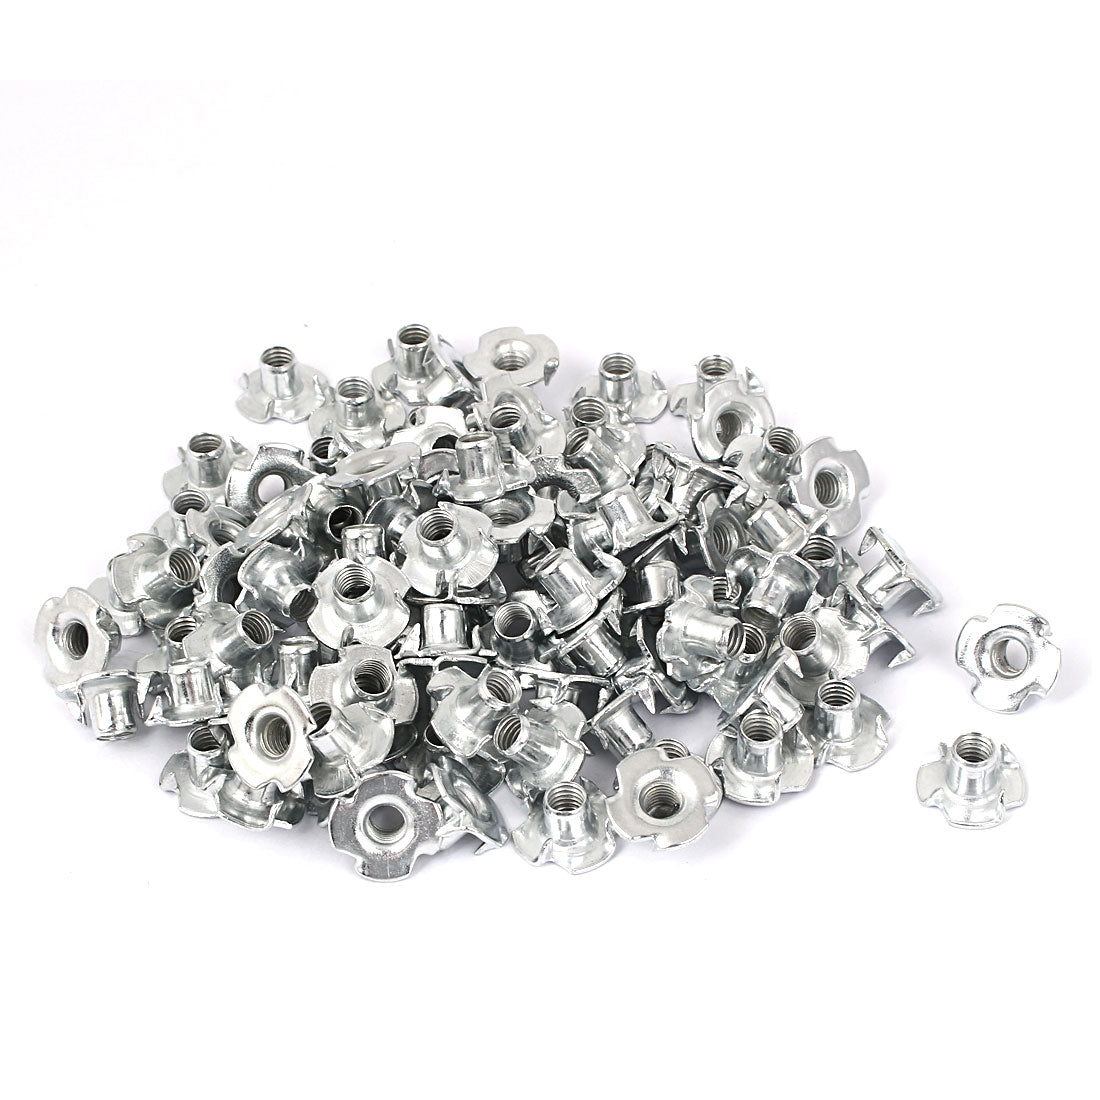 uxcell Uxcell Furniture M6 Thread Zinc Plated 4 Prong Tee Nuts Insert Connectors 100pcs